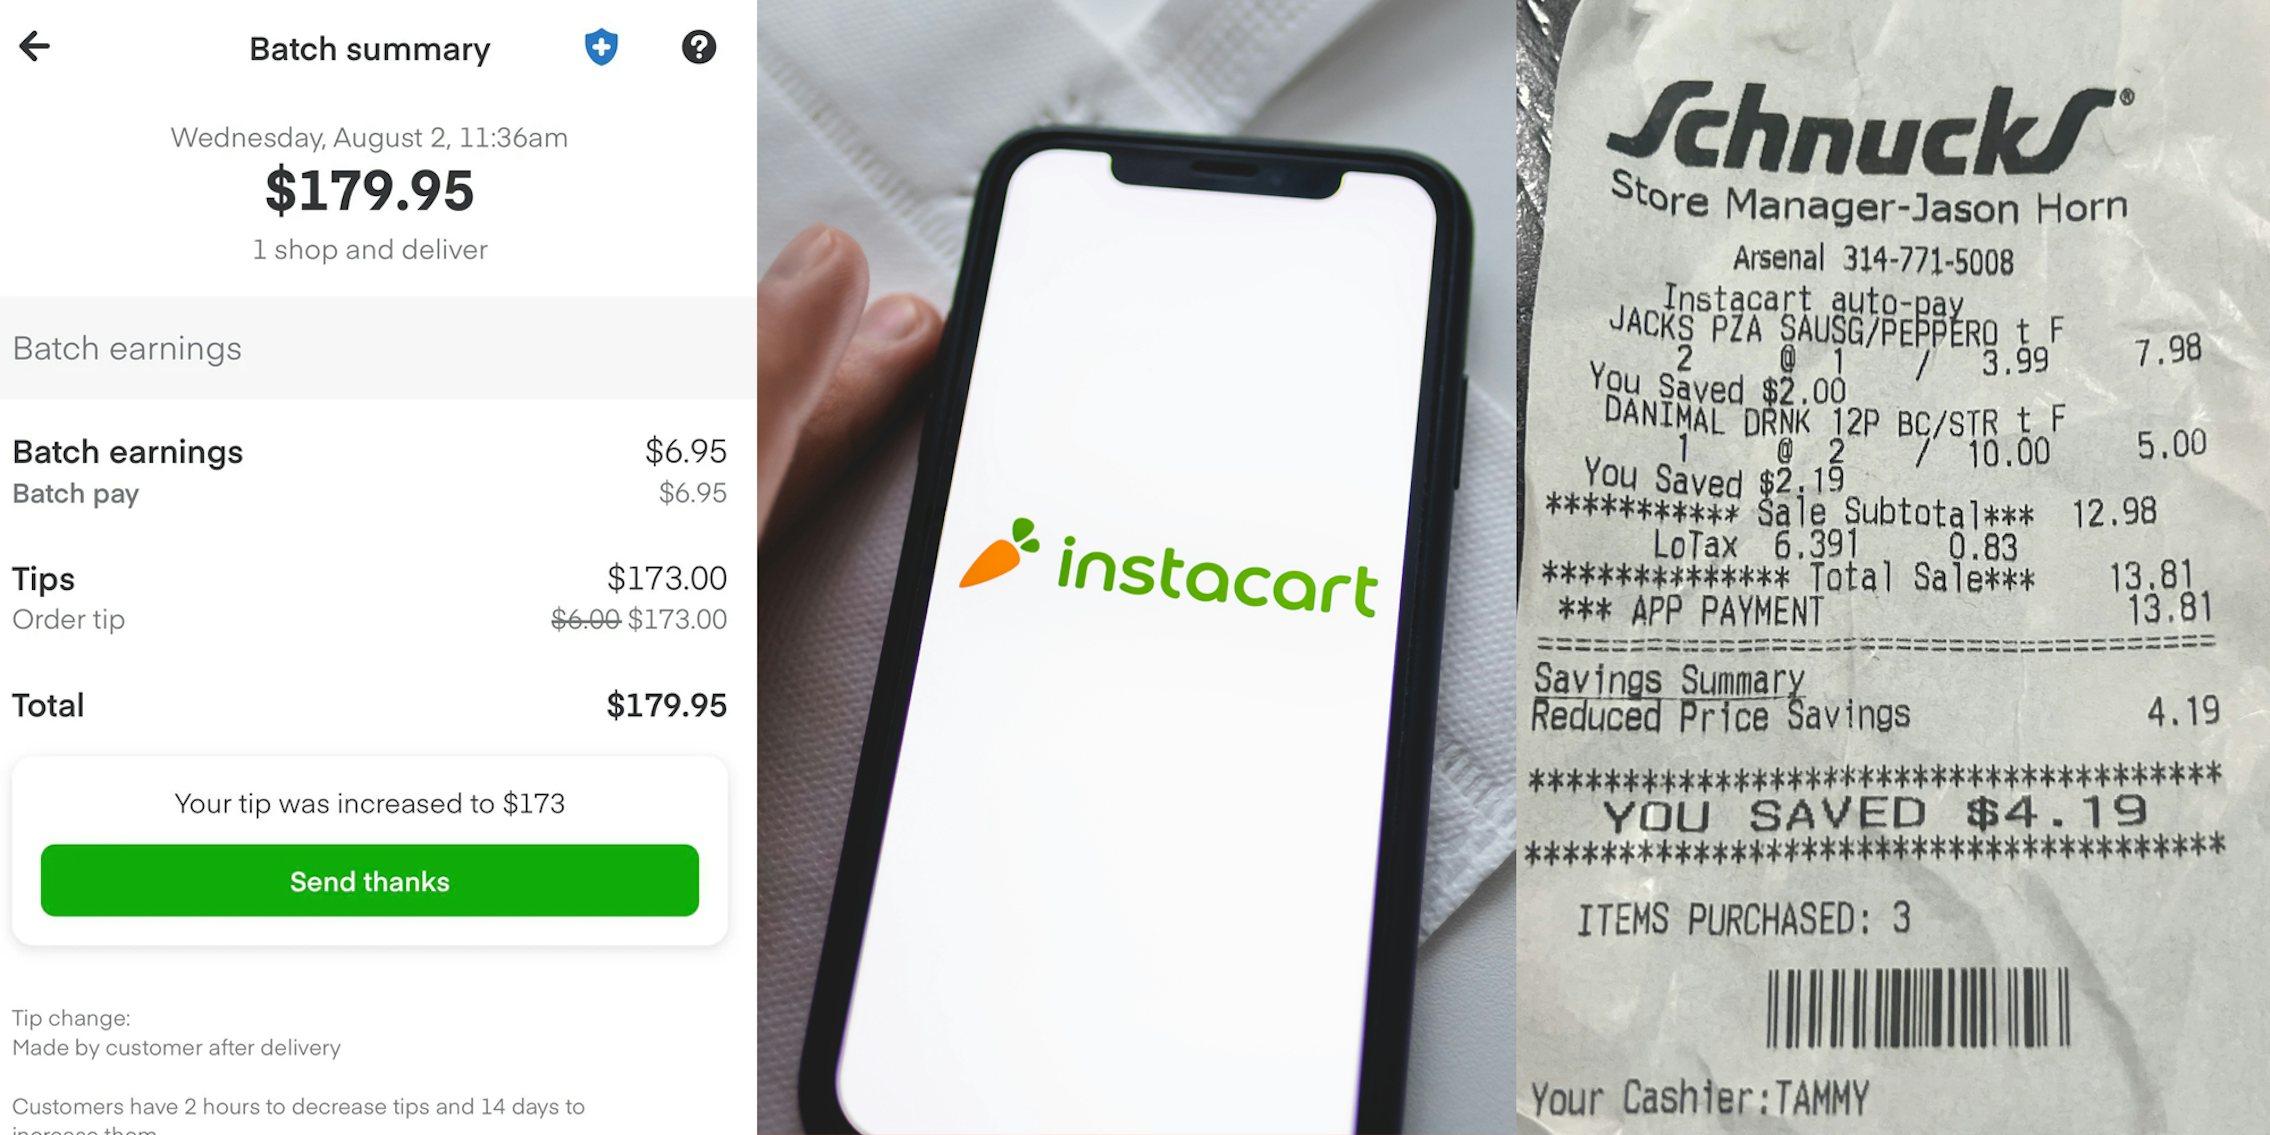 Instacart delivery summary showing $173 tip (l) Instacart app on phone screen on top of napkin (c) Schnucks receipt showing total $13.81 (r)